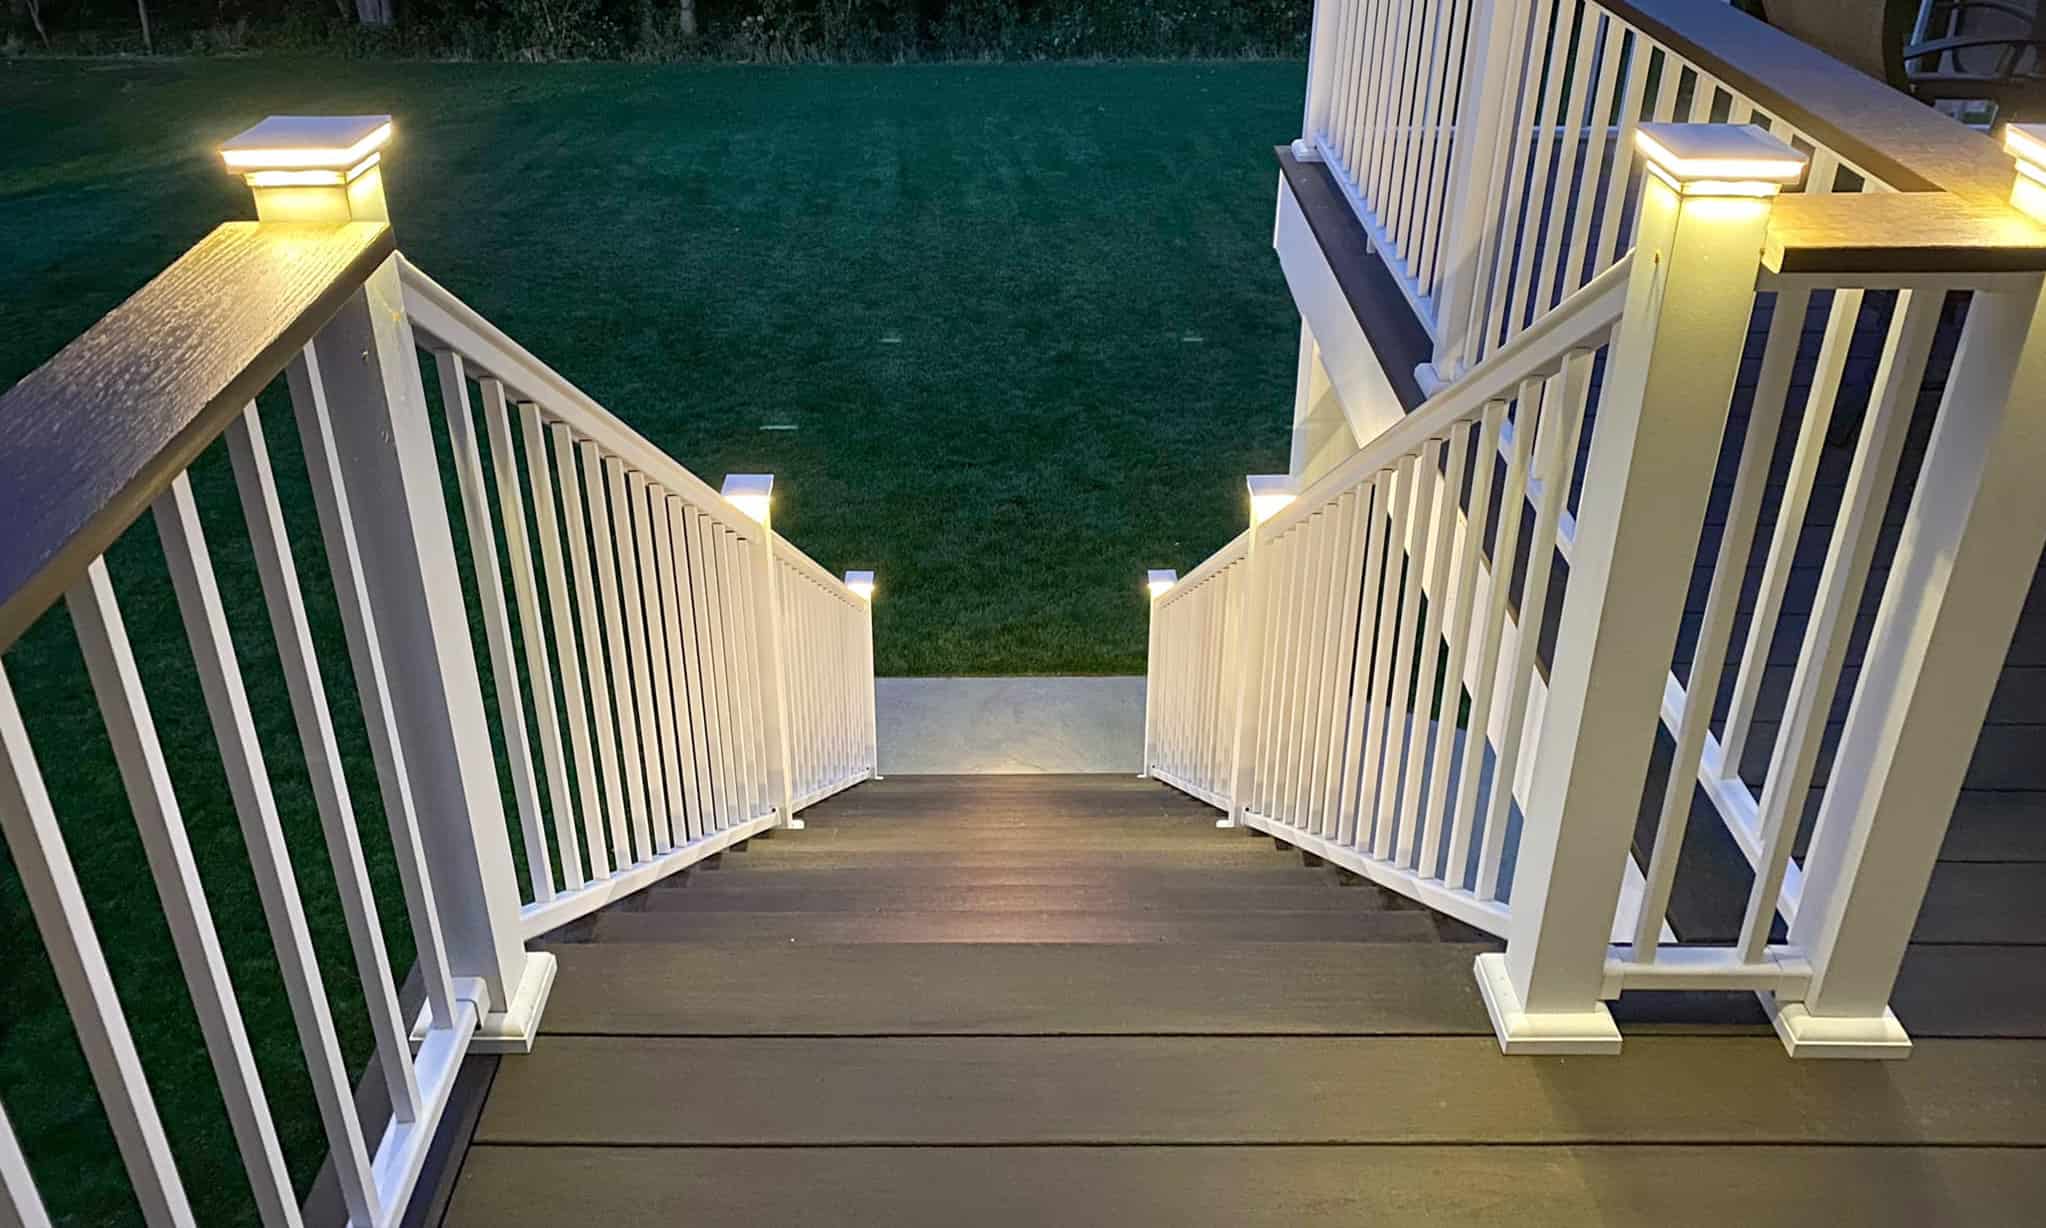 10 Best Solar Deck Lights Reviews and Guide for 2022